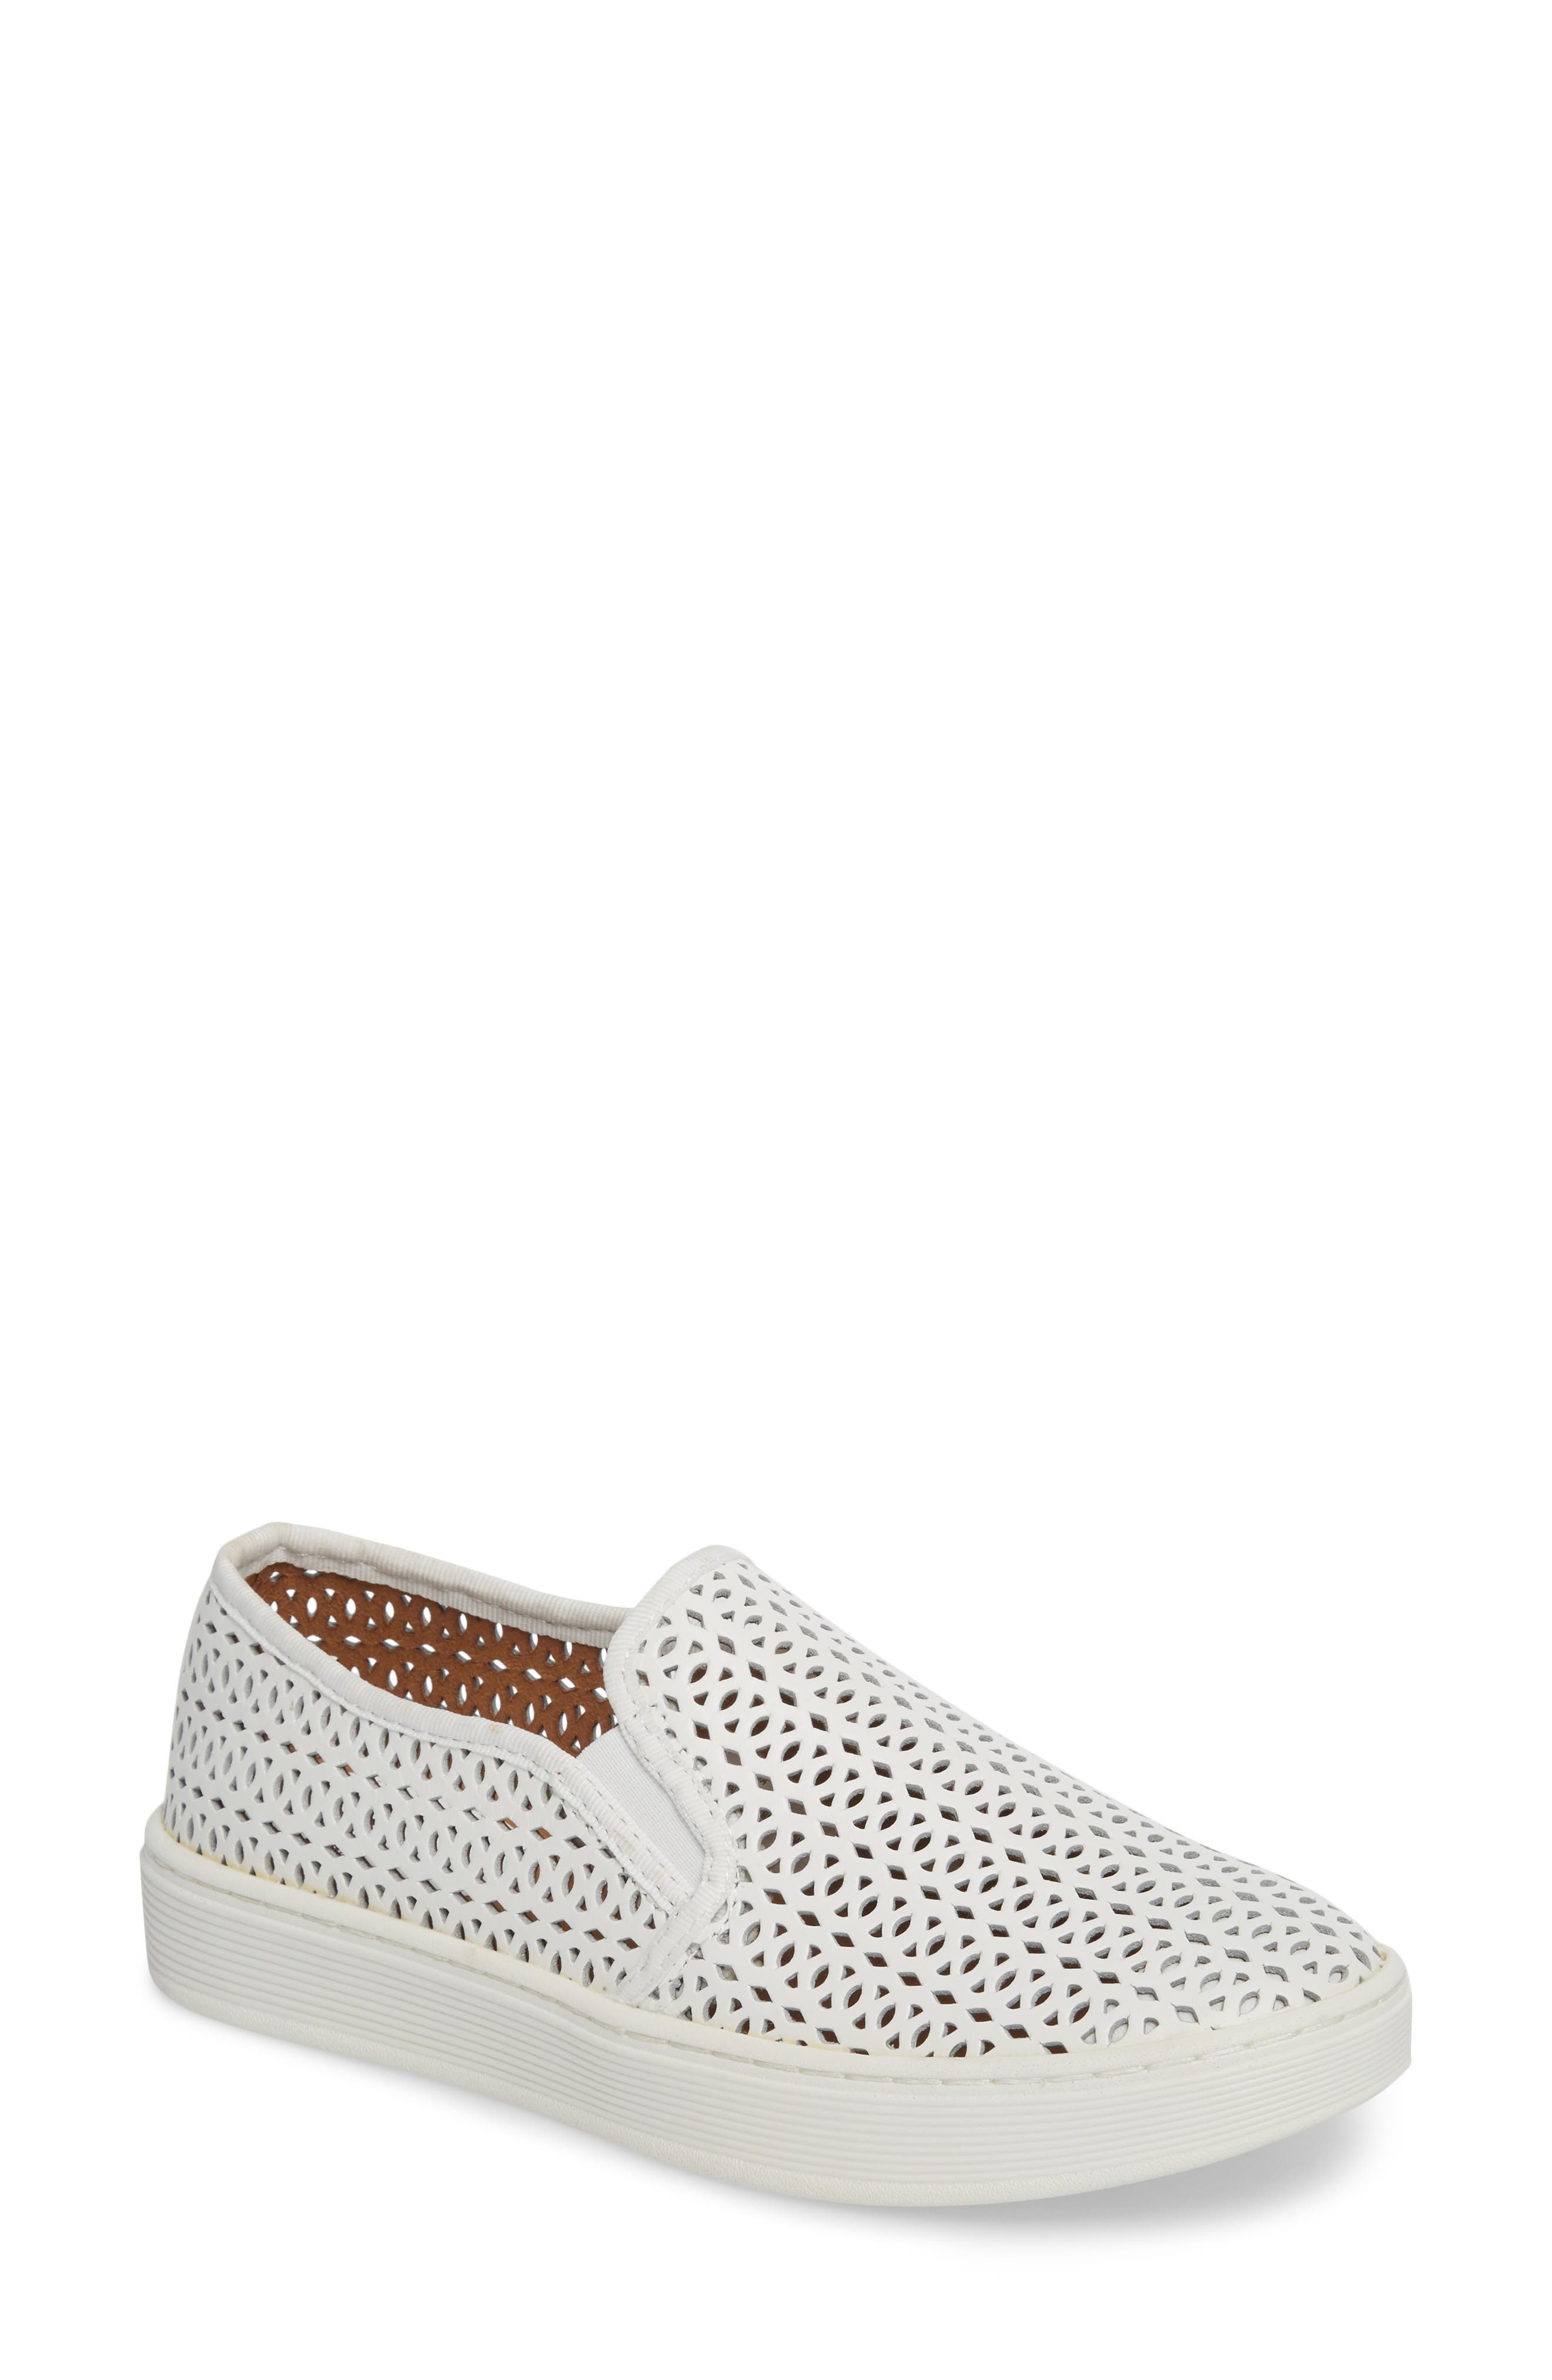 Sofft | Somers II Perforated Slip-On 